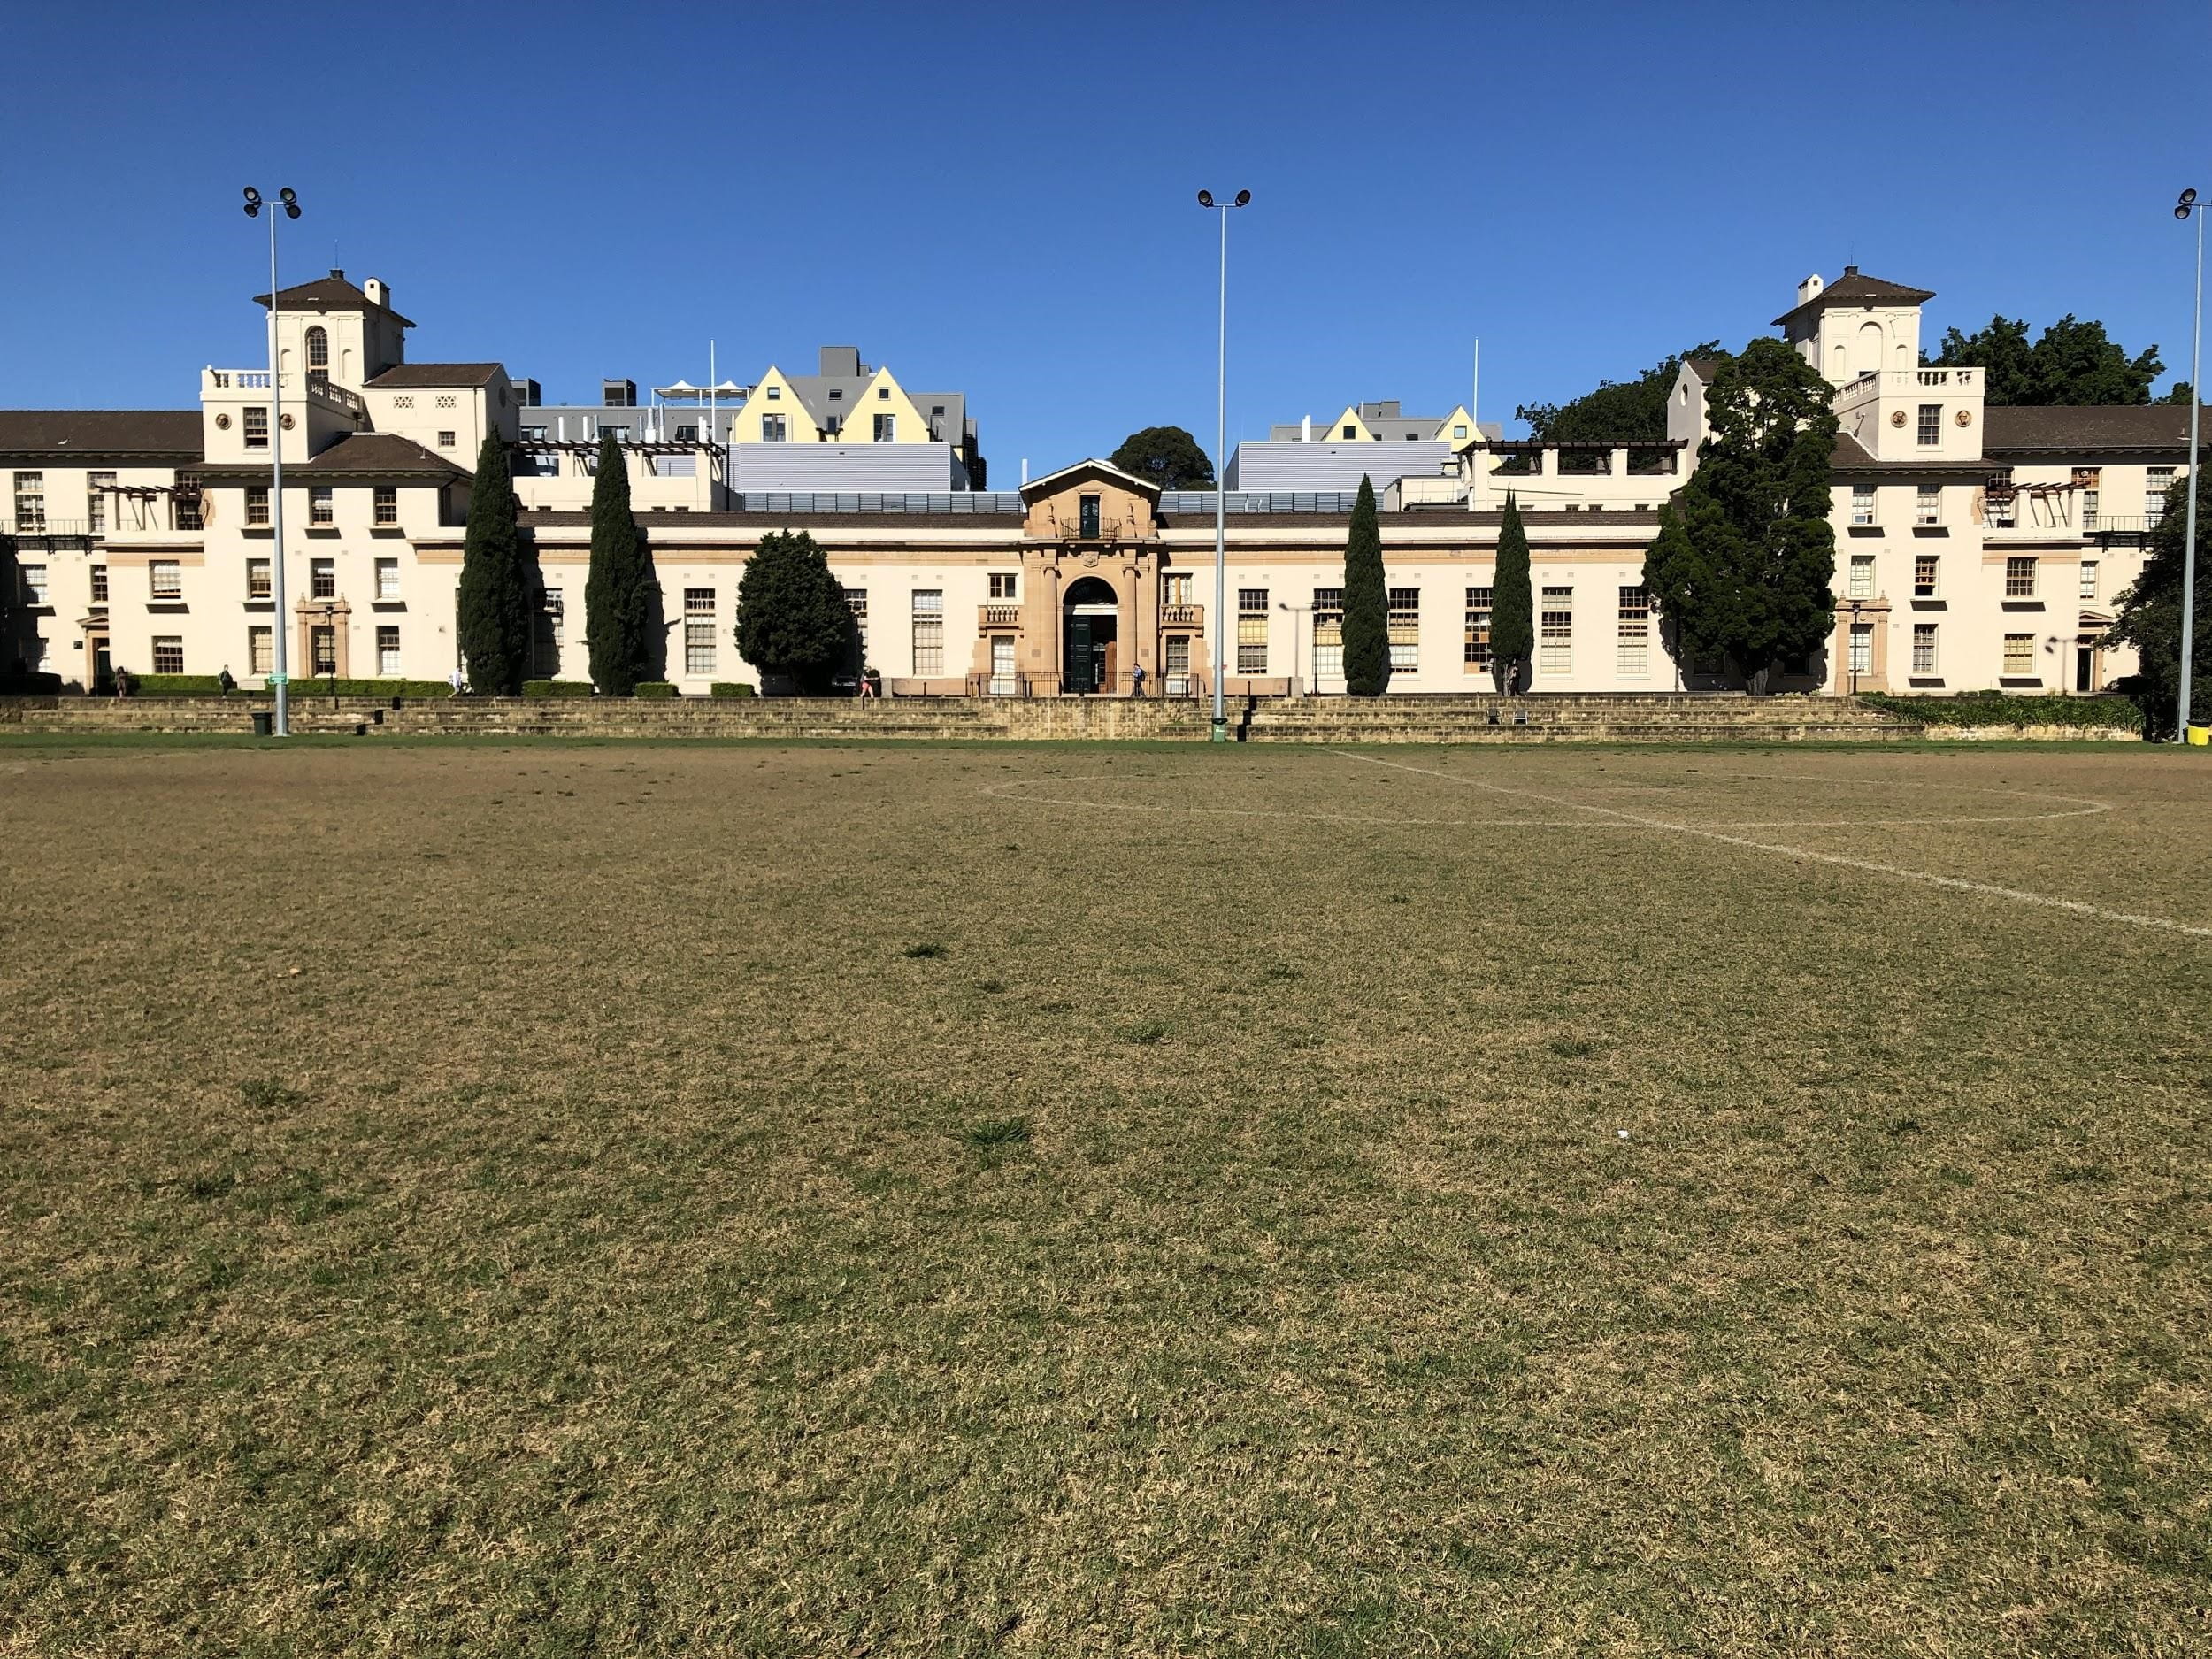 Long beige building with large grassy lawn in front